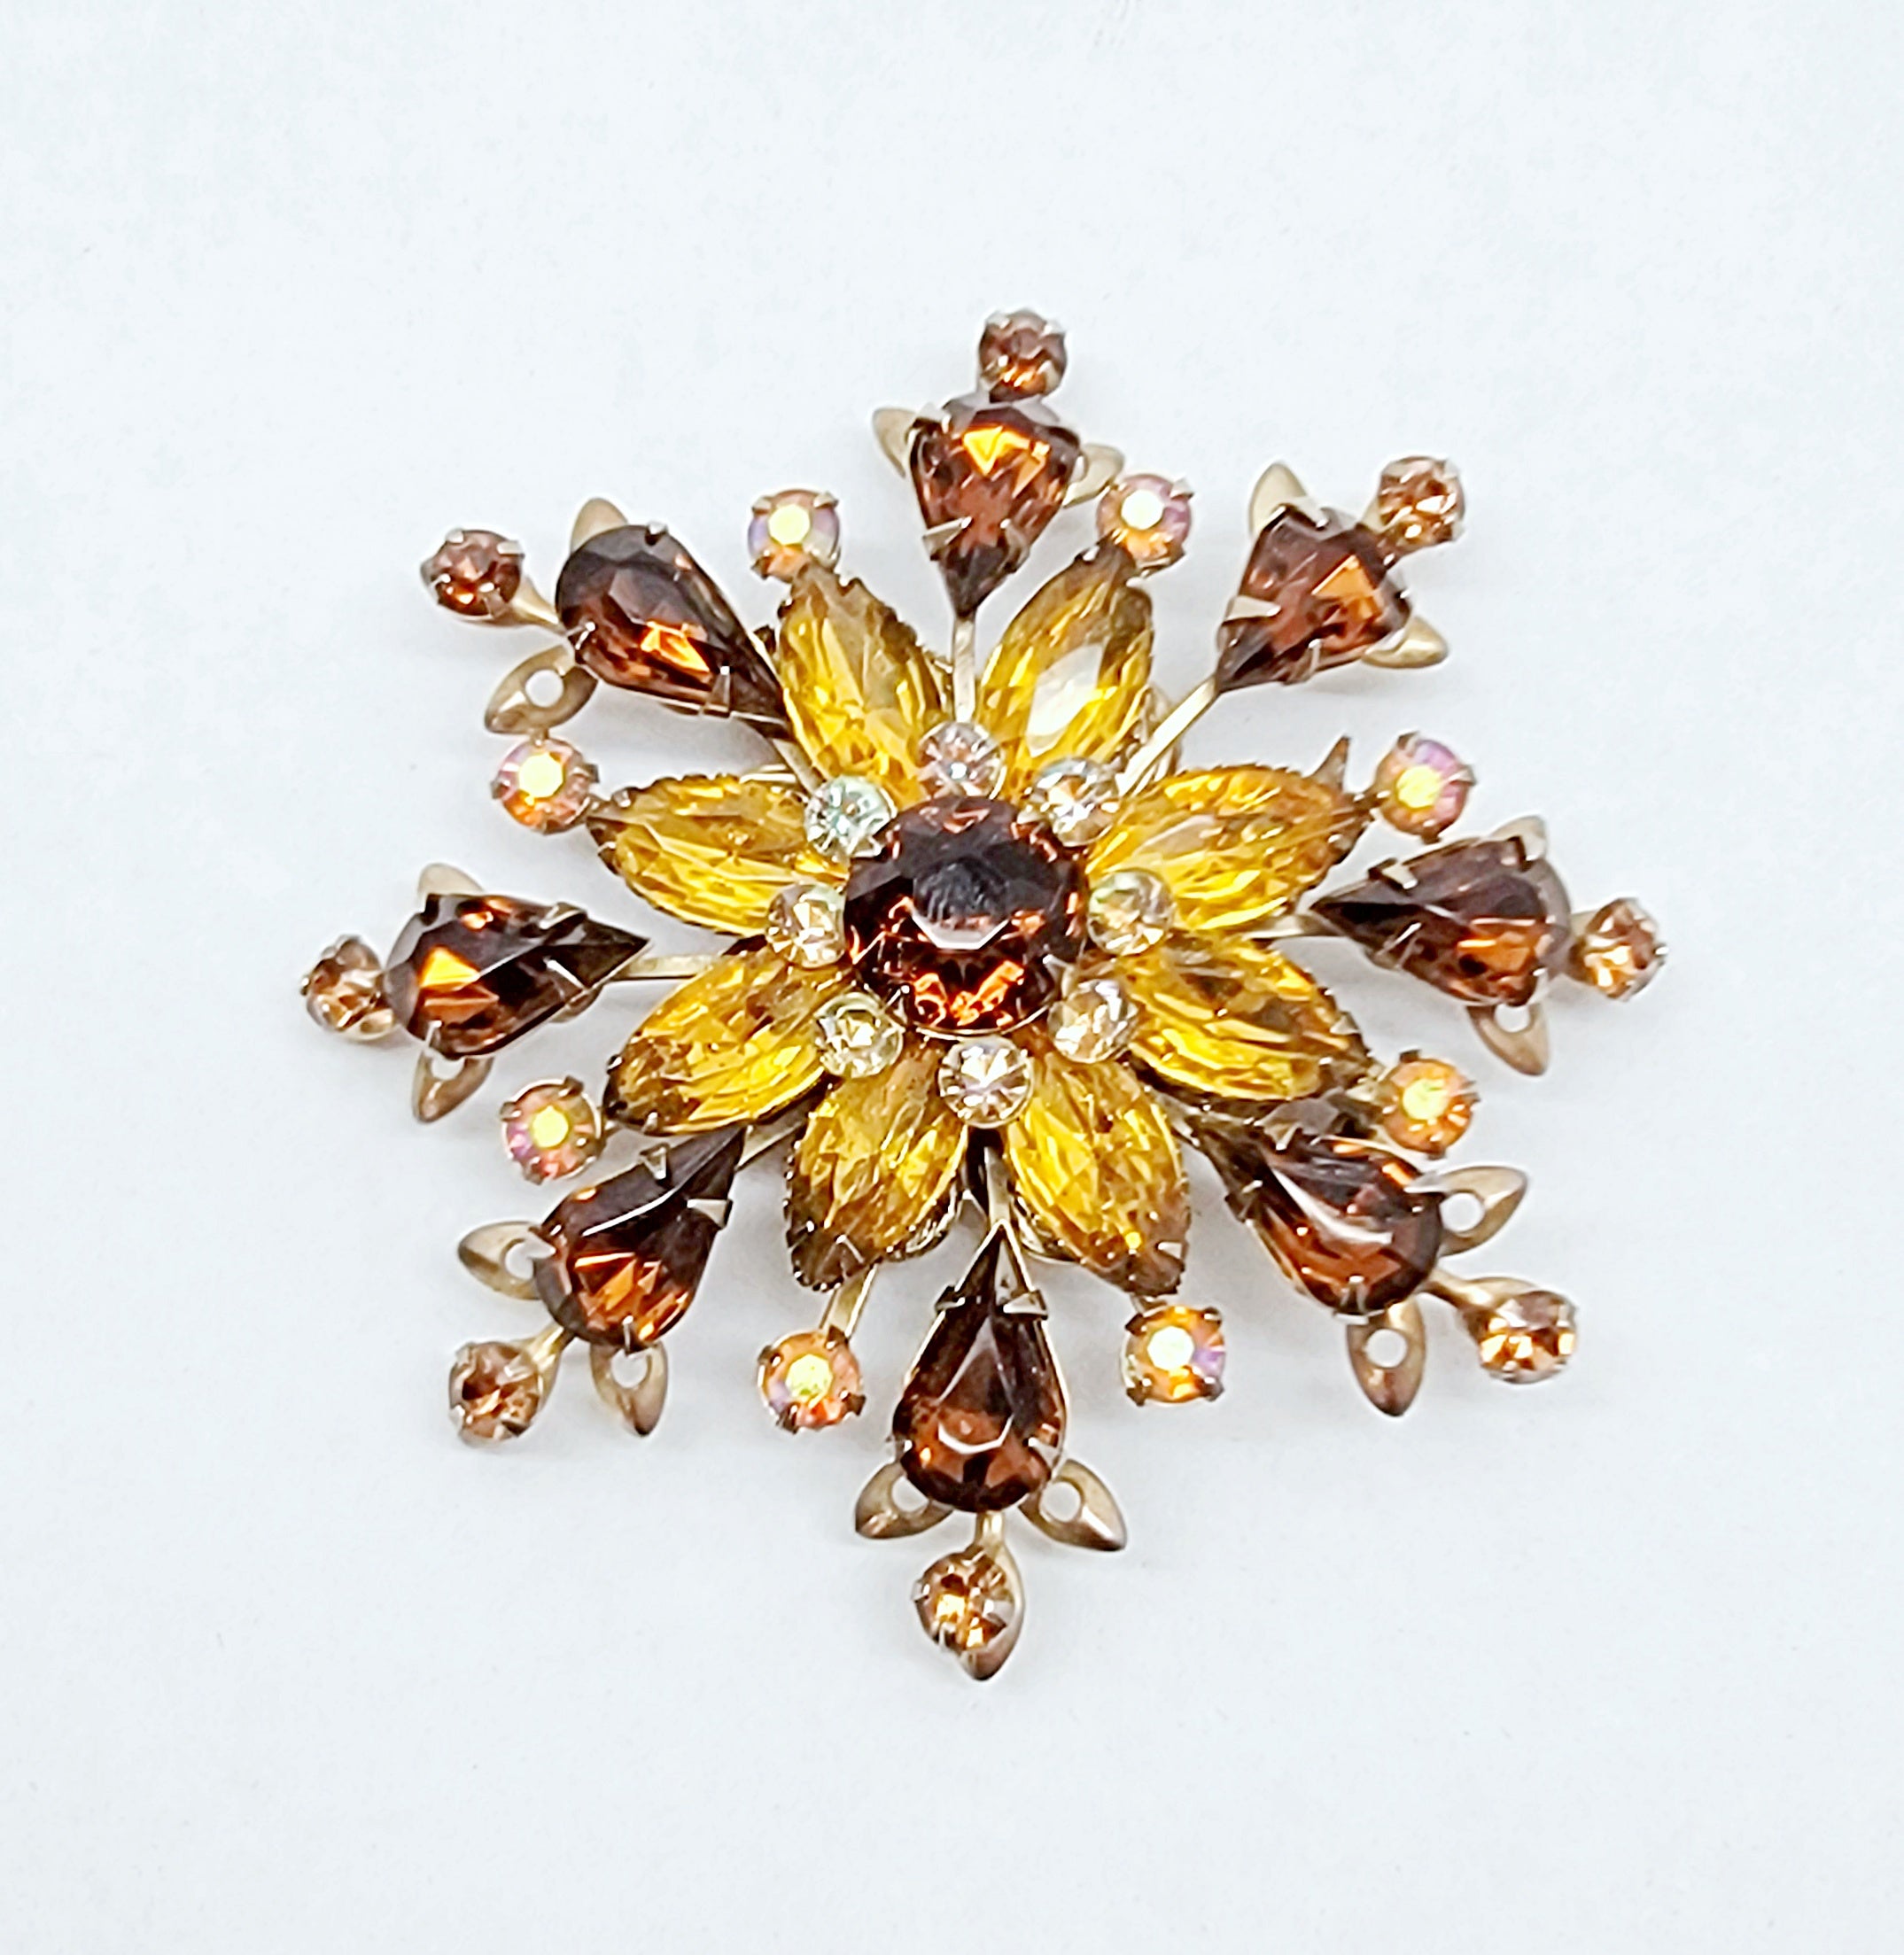 Vintage Gold Tone Amber, Brown and AB Rhinestone Brooch Pin - Hers and His Treasures